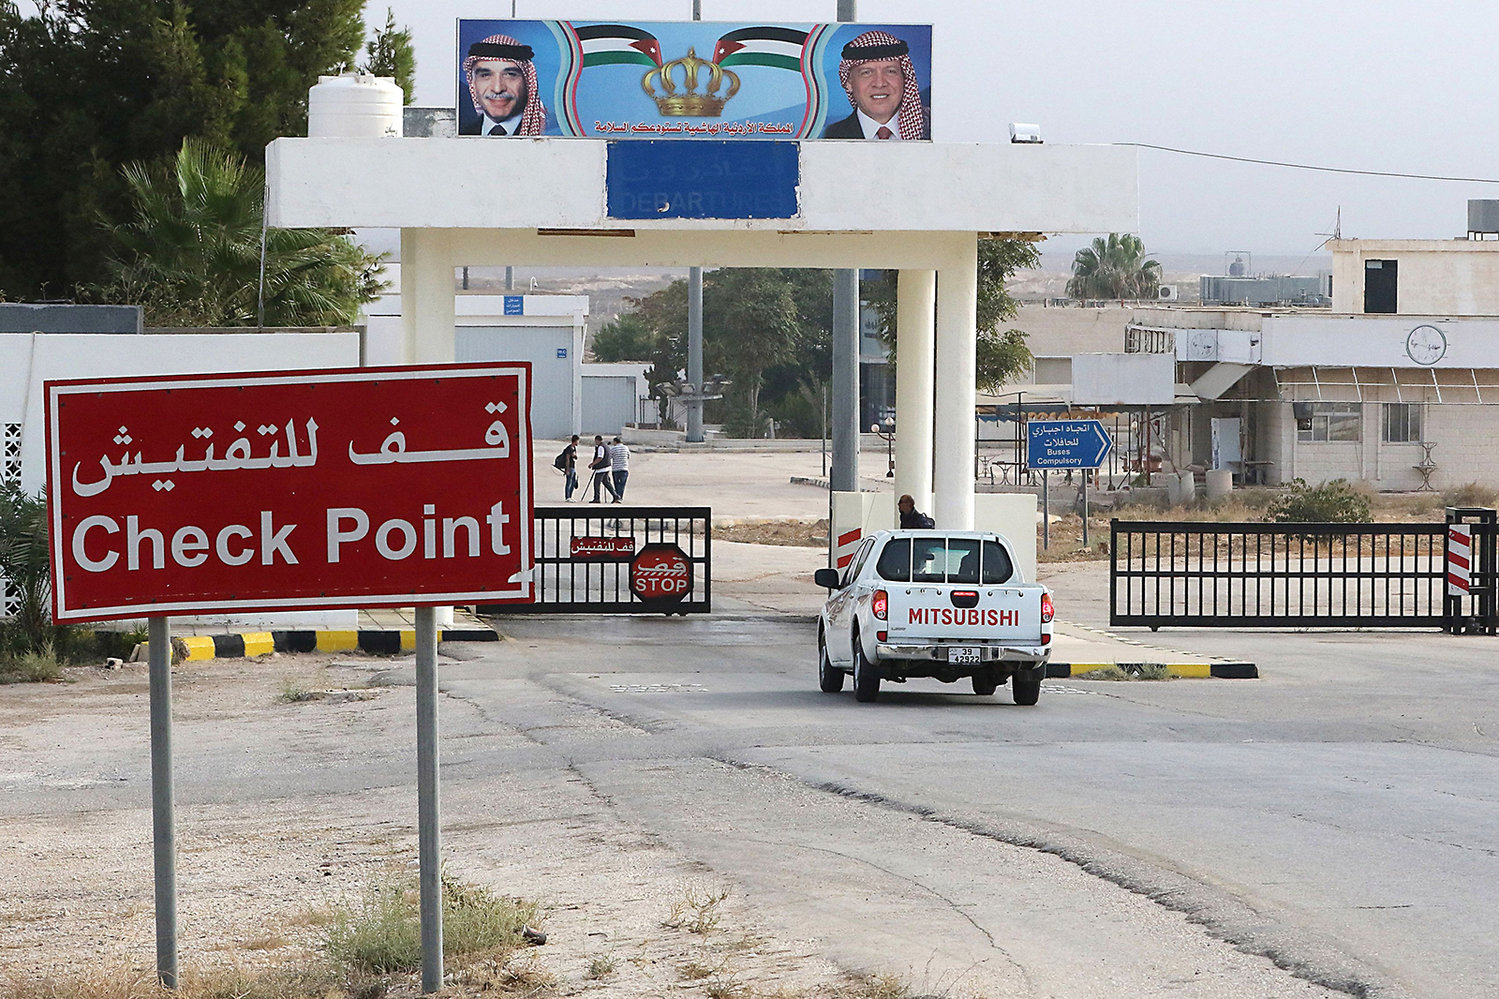 A vehicle arrives at the Jaber border crossing between Jordan and Syria (Nassib crossing on the Syrian side) on the day of its reopening on Oct. 15, 2018, in the Jordanian Mafraq governorate. (Khalil Mazraawi/AFP via Getty Images/TNS)